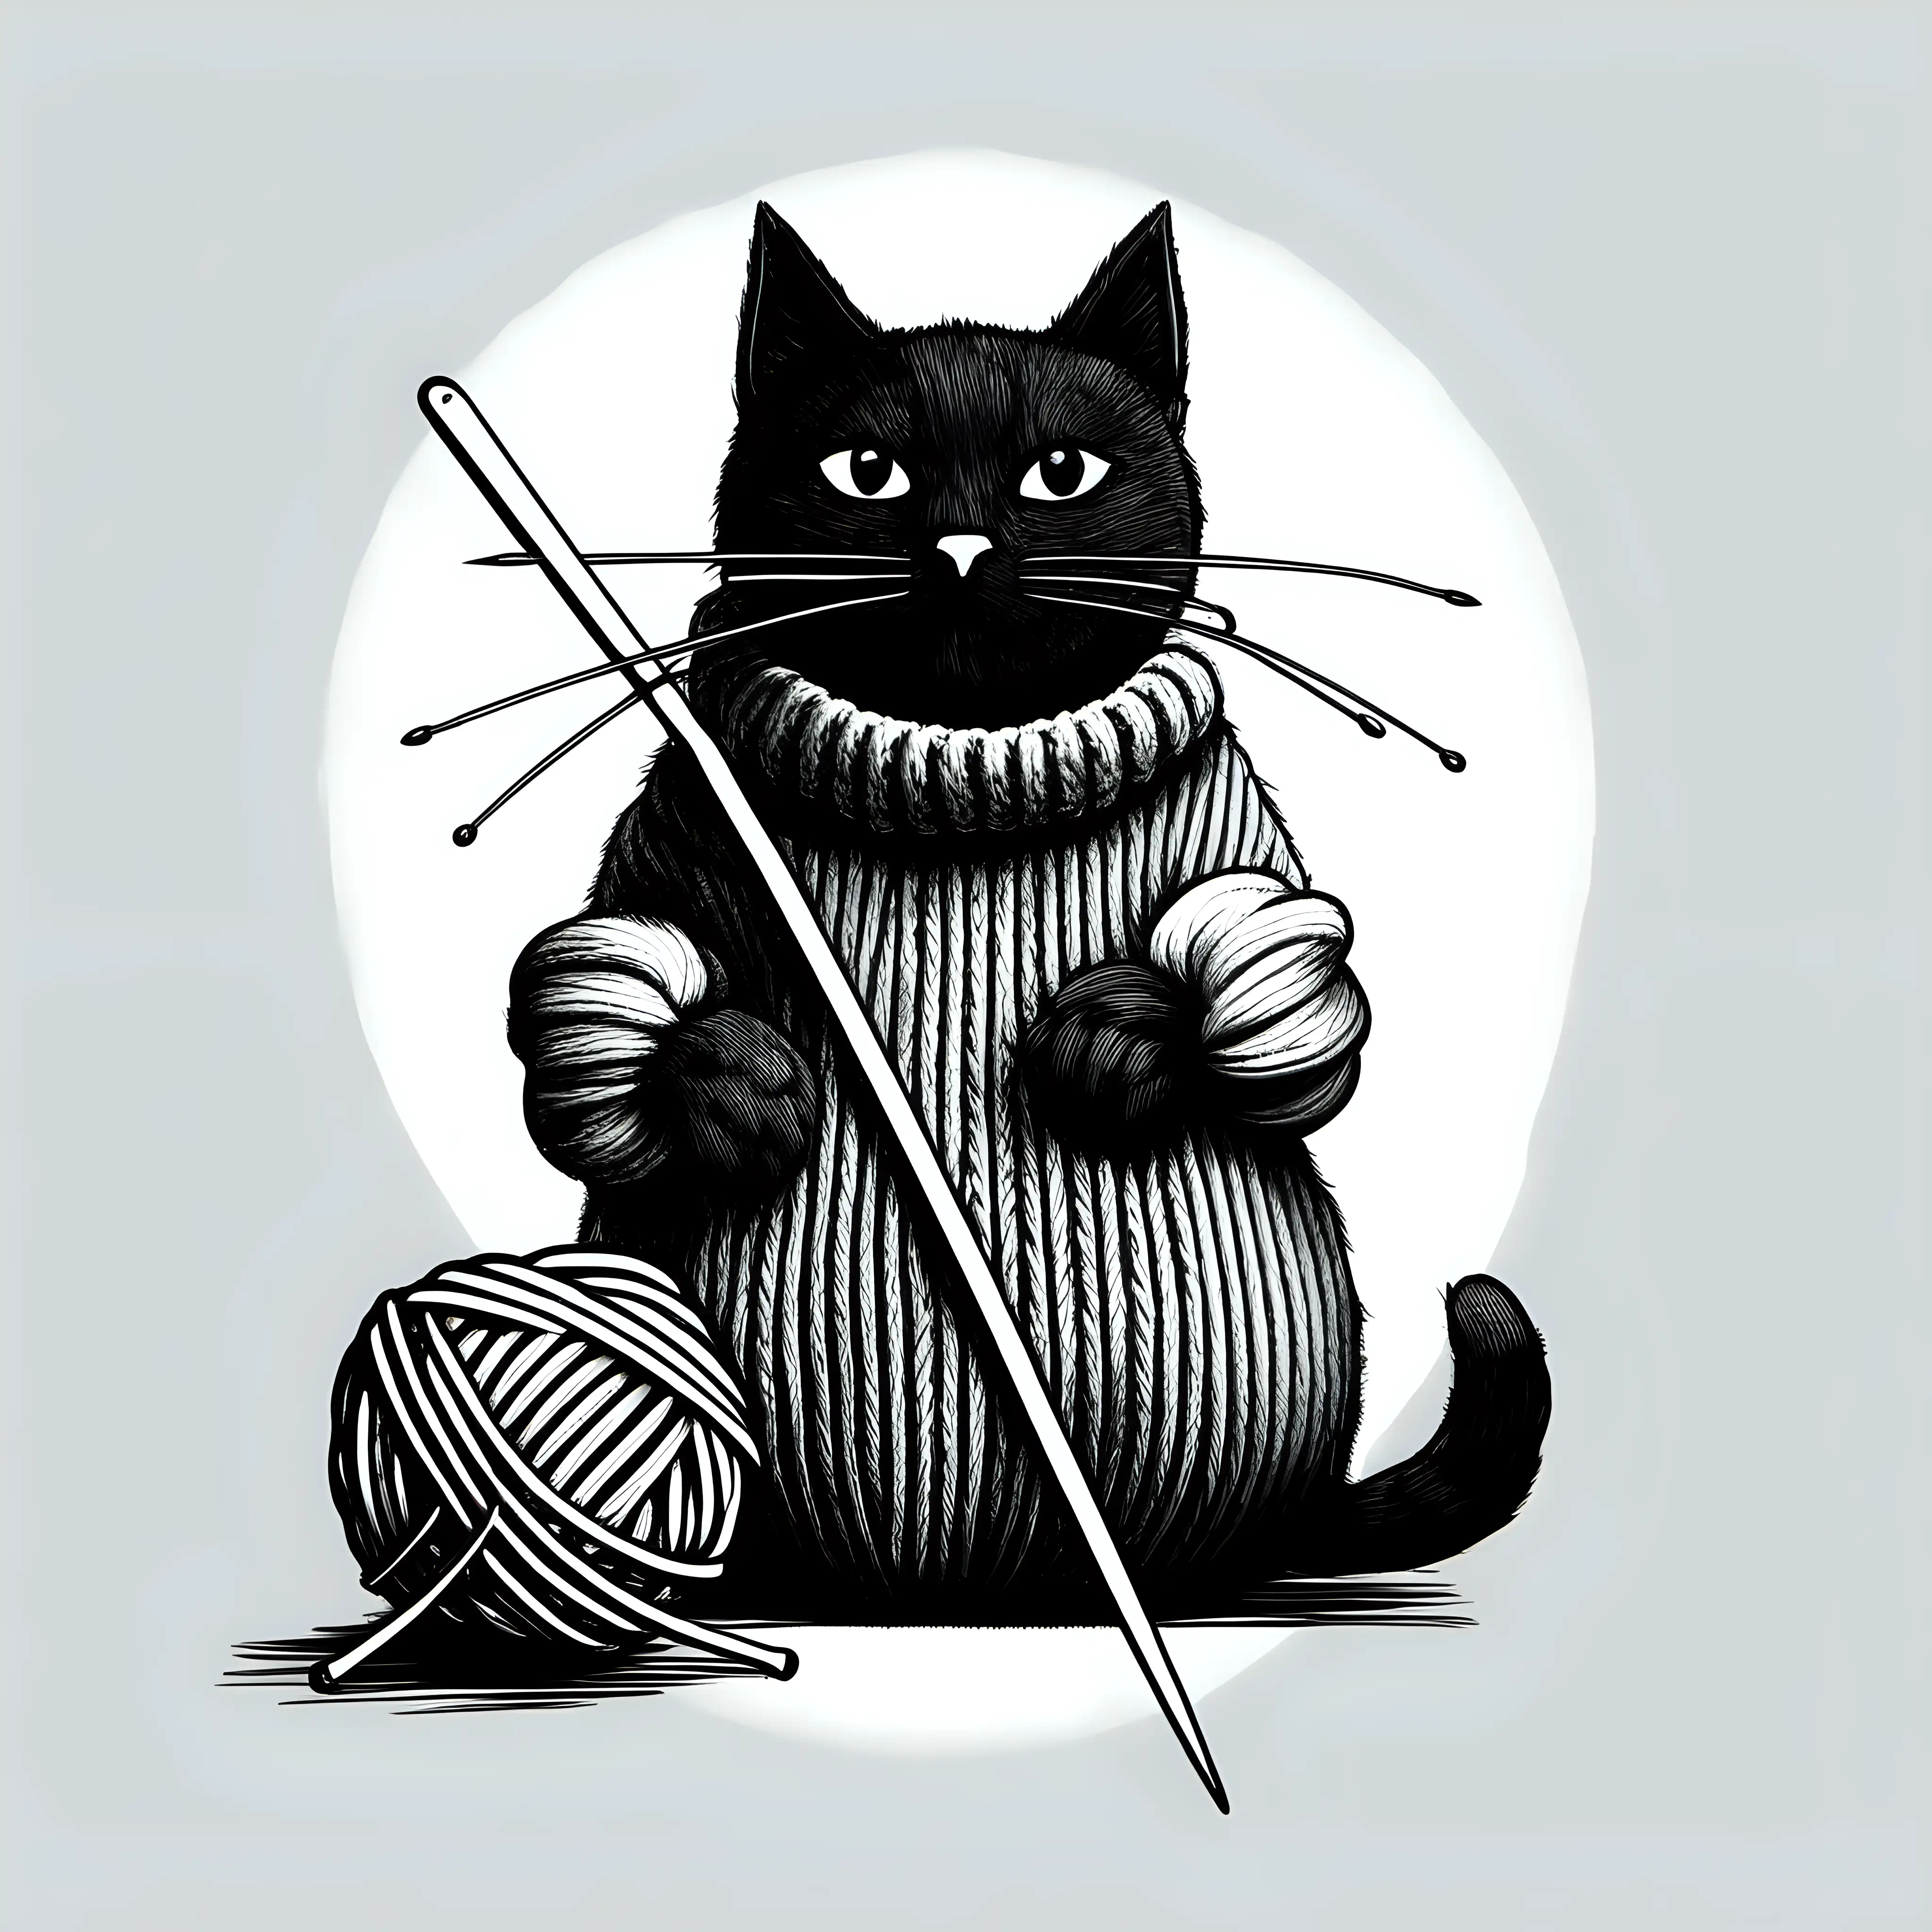 Minimalist Black and White Sketch of a Cat Knitting